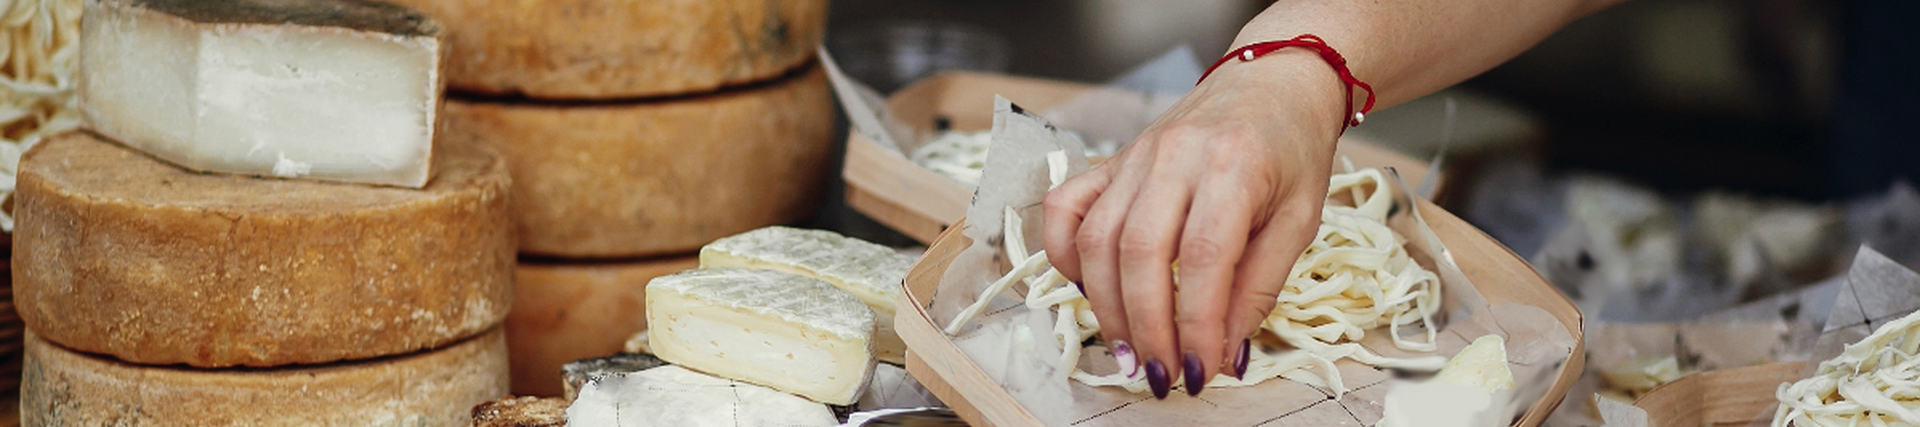 A stall table with many different cheeses in different wax. A white hand is grabbing grated cheese from the table